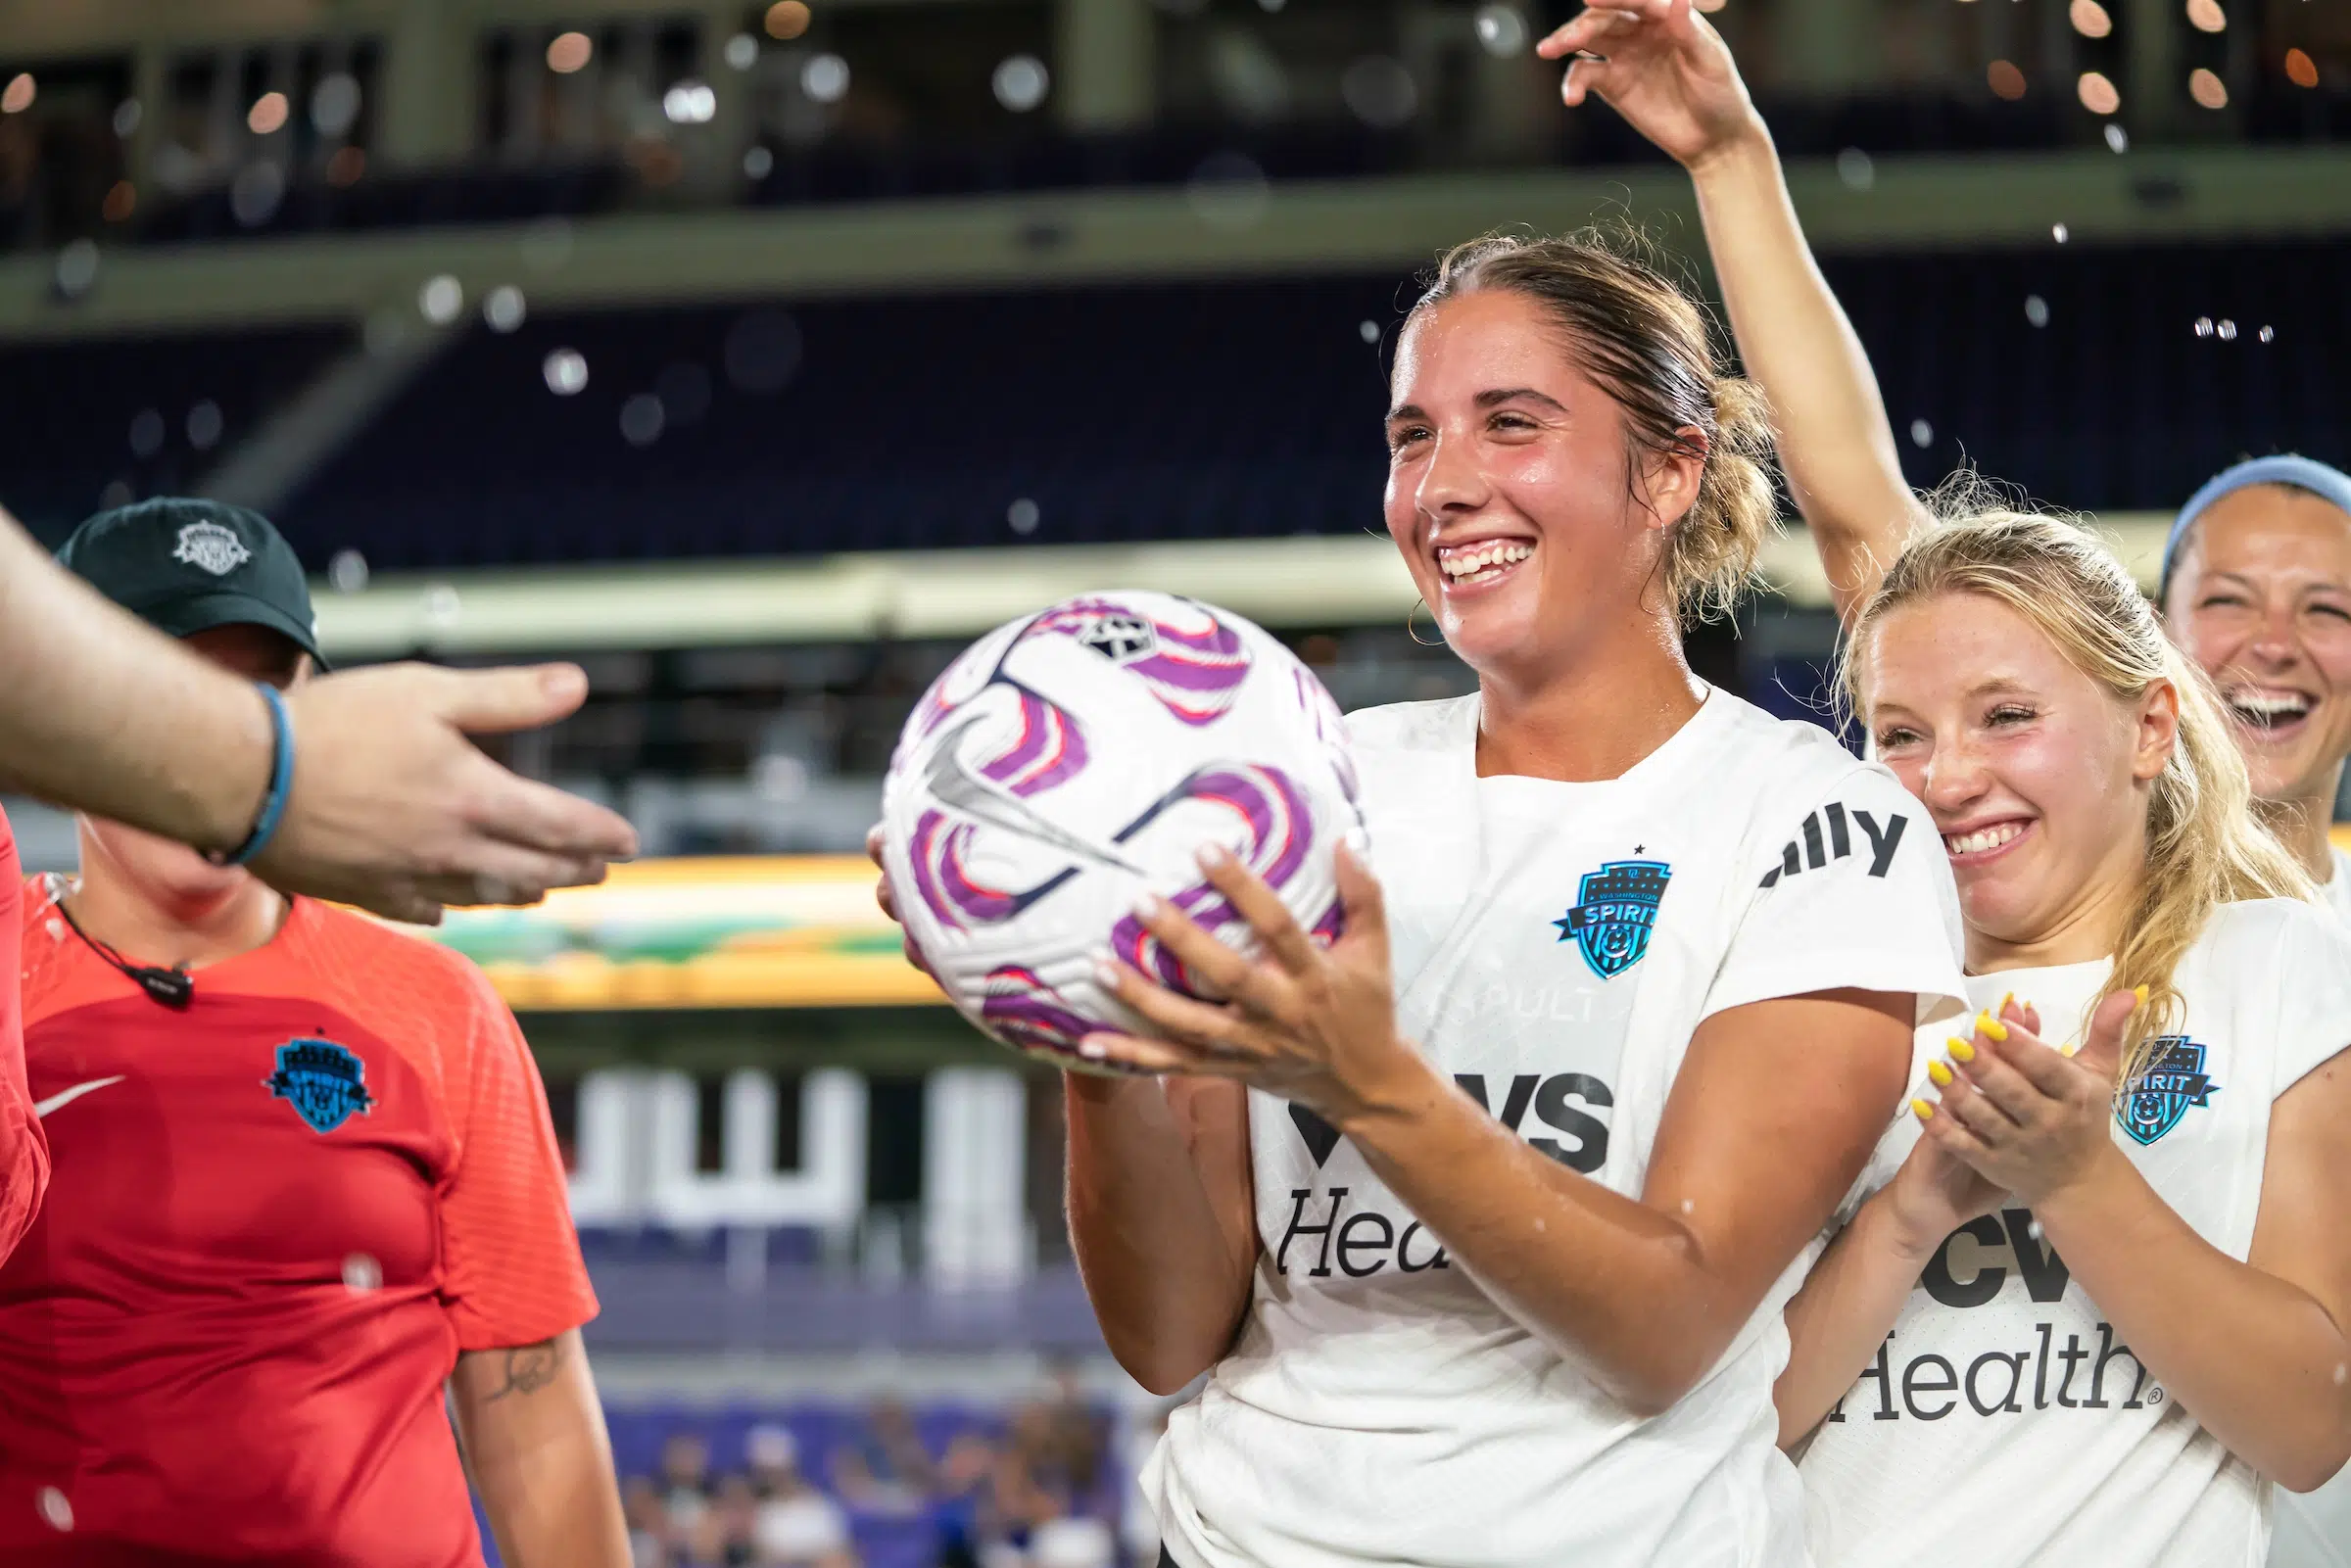 Mariana Speckmaier in a white uniform smiles as she grabs a soccer ball from outstretched hands coming in from the left side of the frame.